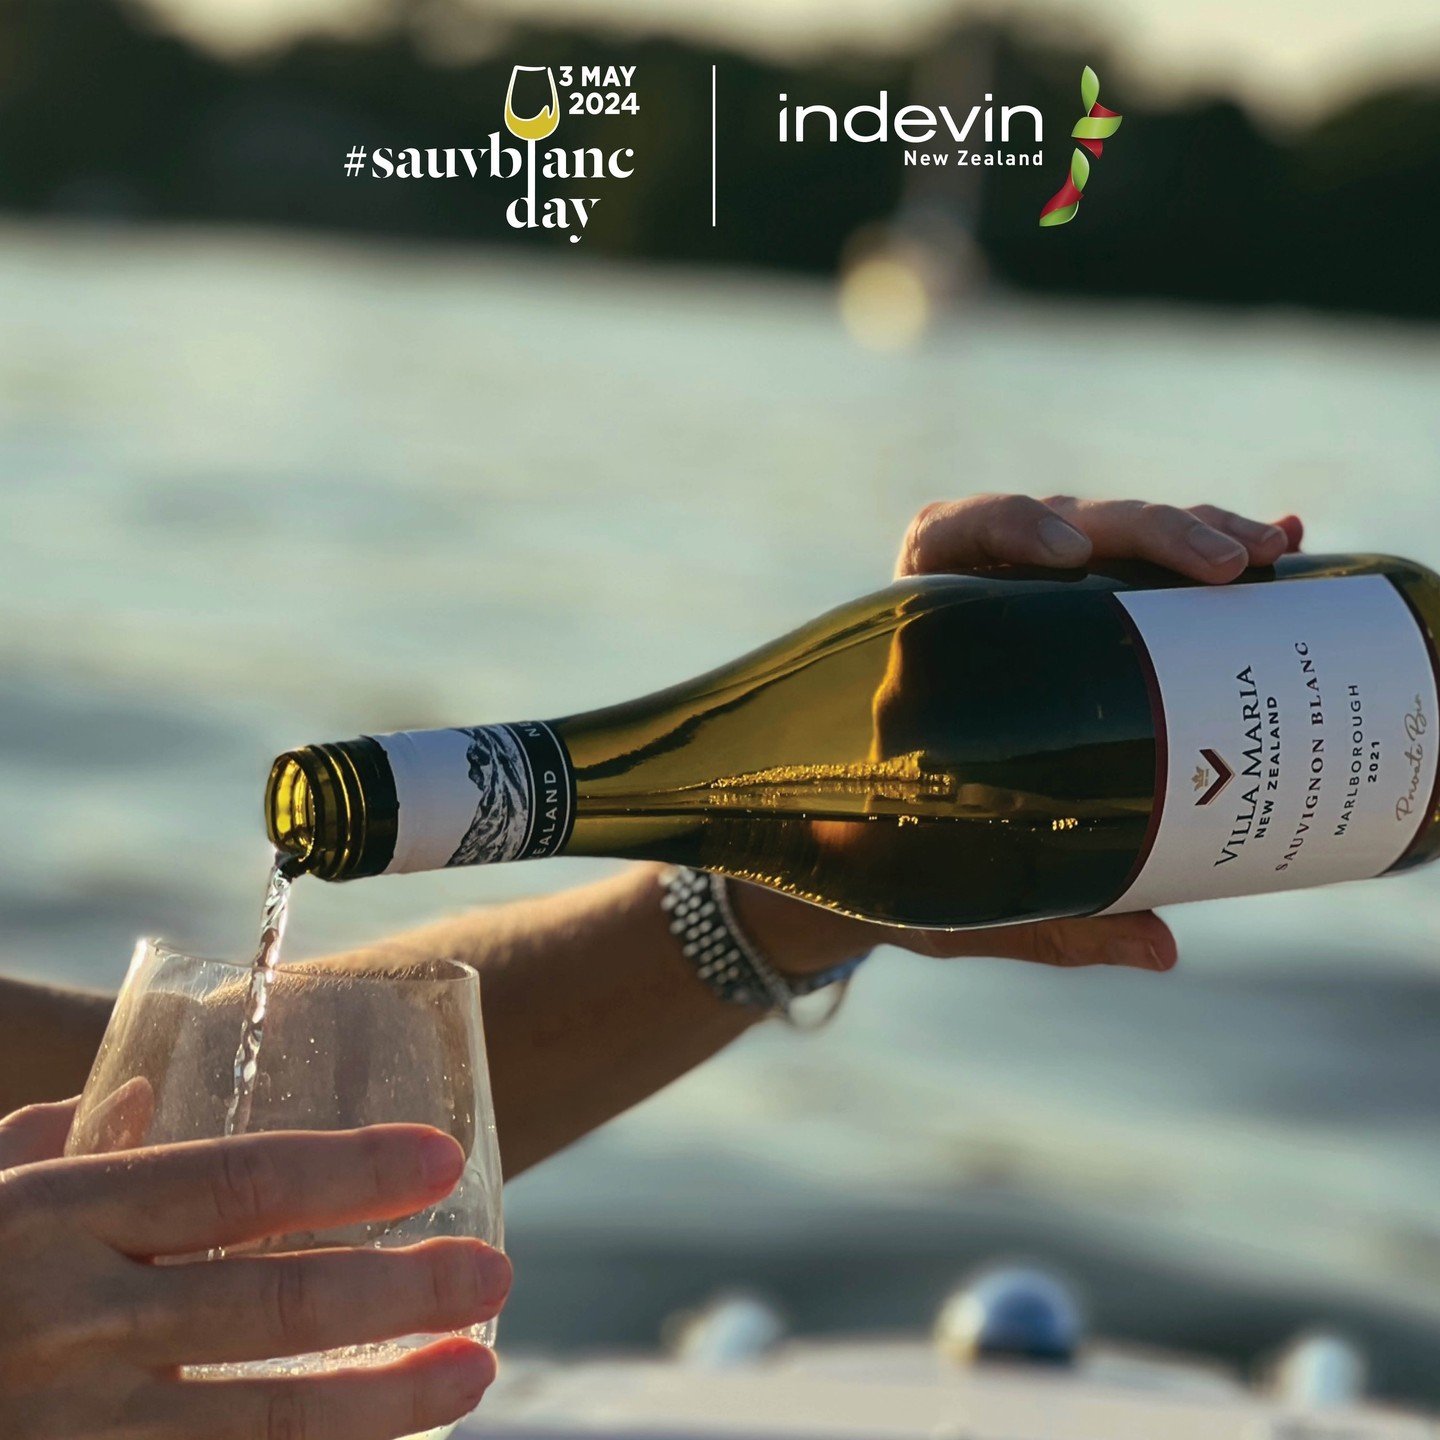 It&rsquo;s International Sauvignon Blanc Day! This year, 83% of the grapes we harvested were Sauvignon Blanc and we are forever enamoured by this versatile grape. 

Zesty, zingy and always sure to make your tastebuds pop, let&rsquo;s raise a glass to